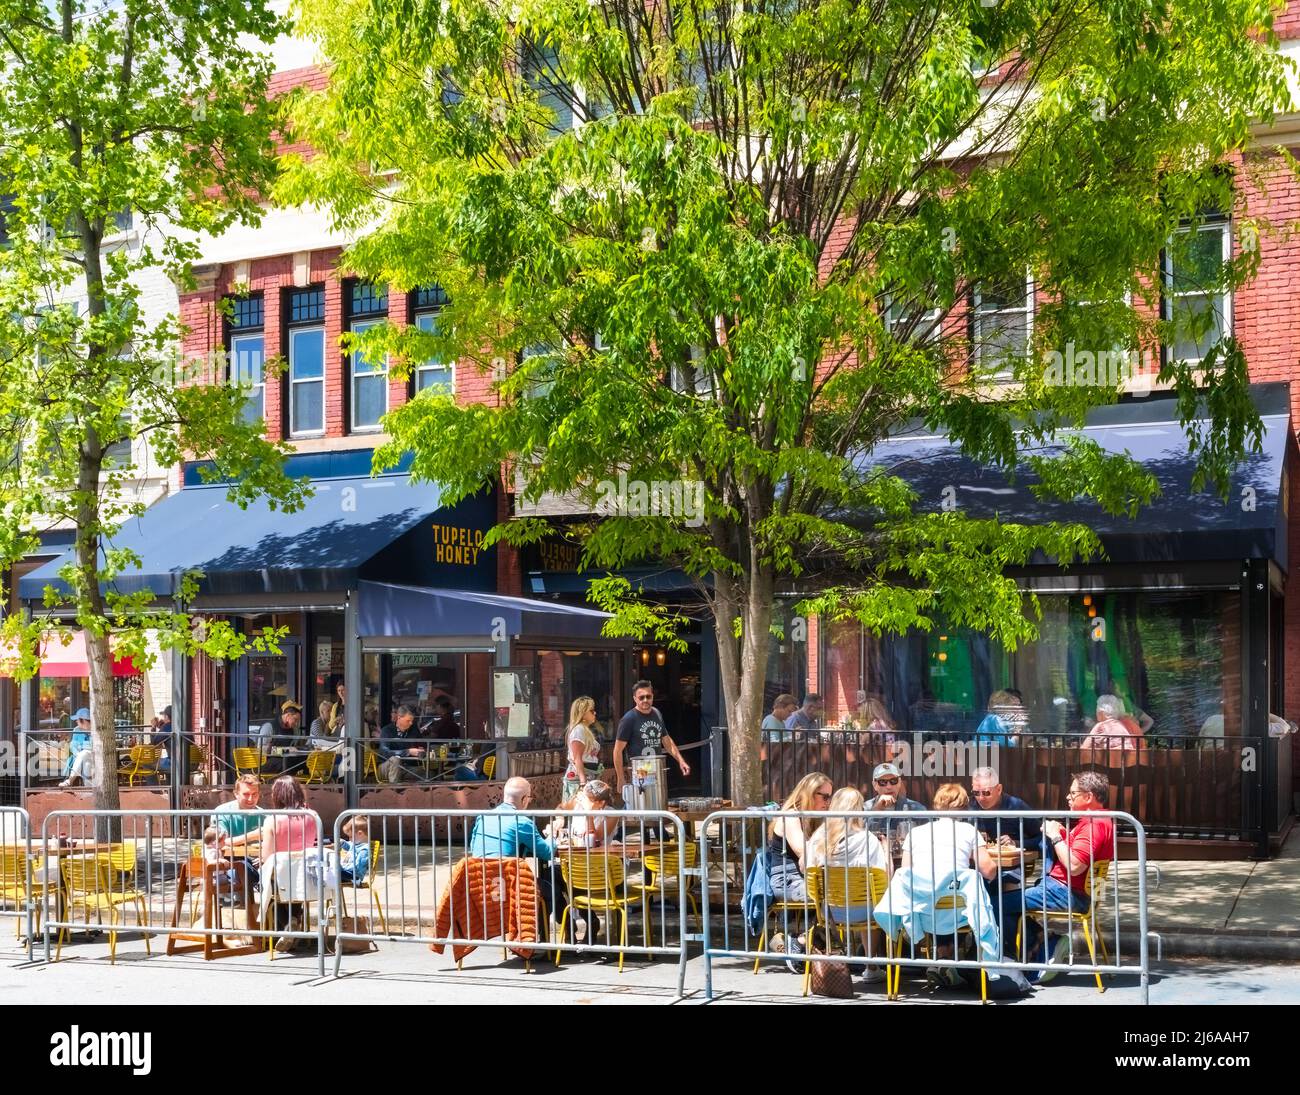 ASHEVILLE, NC, USA-28 APRIL 2022: Tupelo Honey restaurant, showing inside and outside seating, busy with customers. Stock Photo